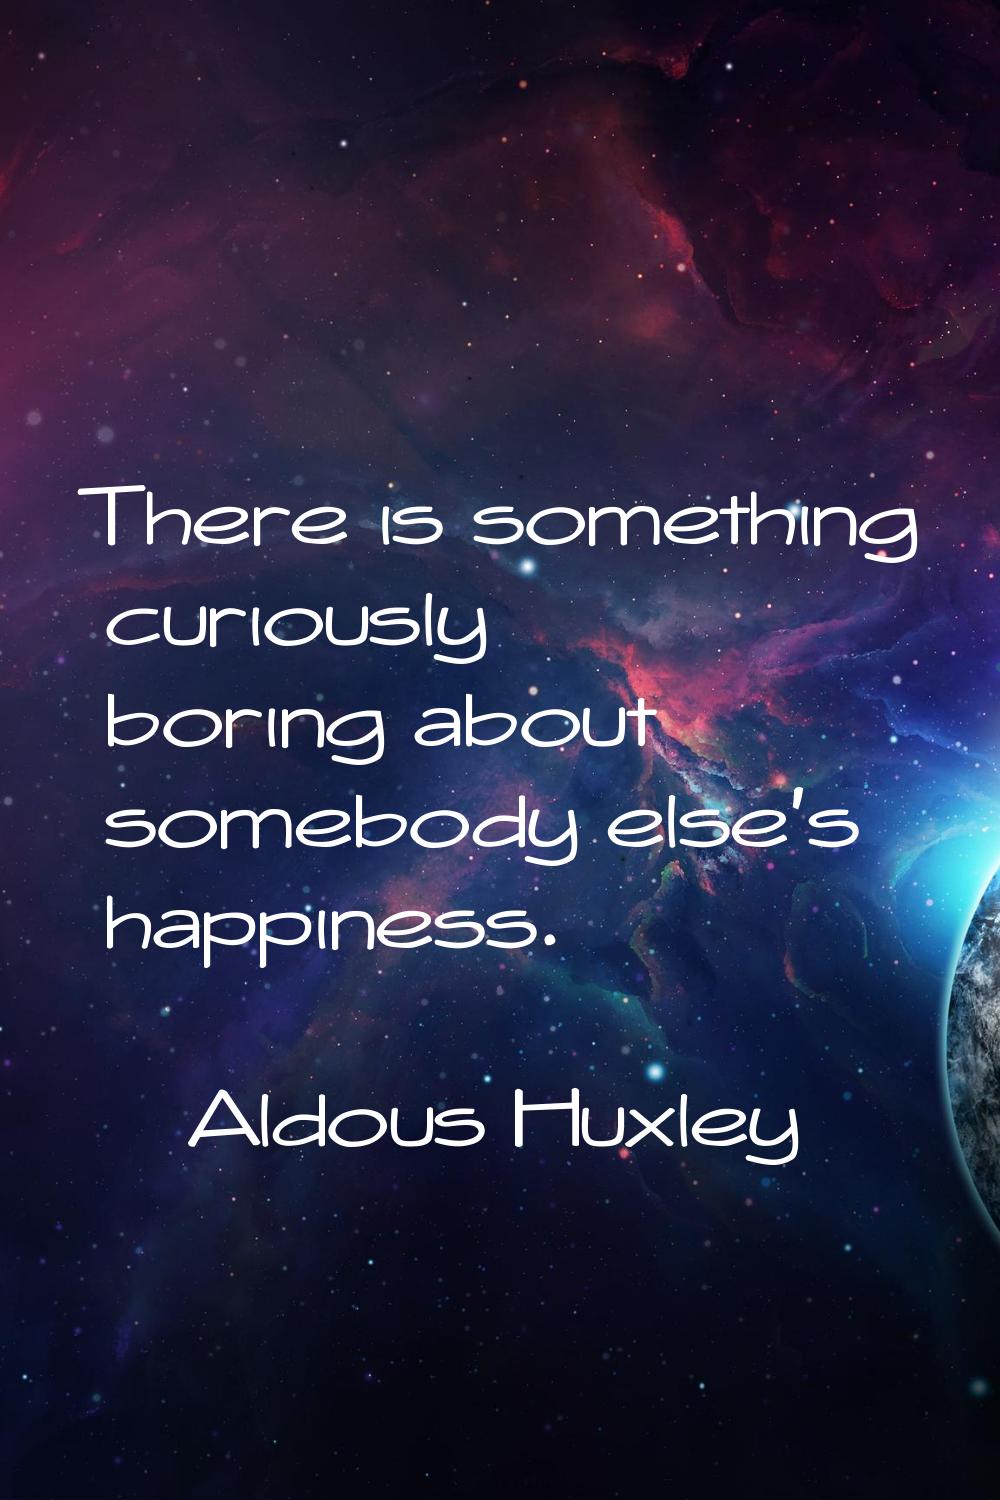 There is something curiously boring about somebody else's happiness.